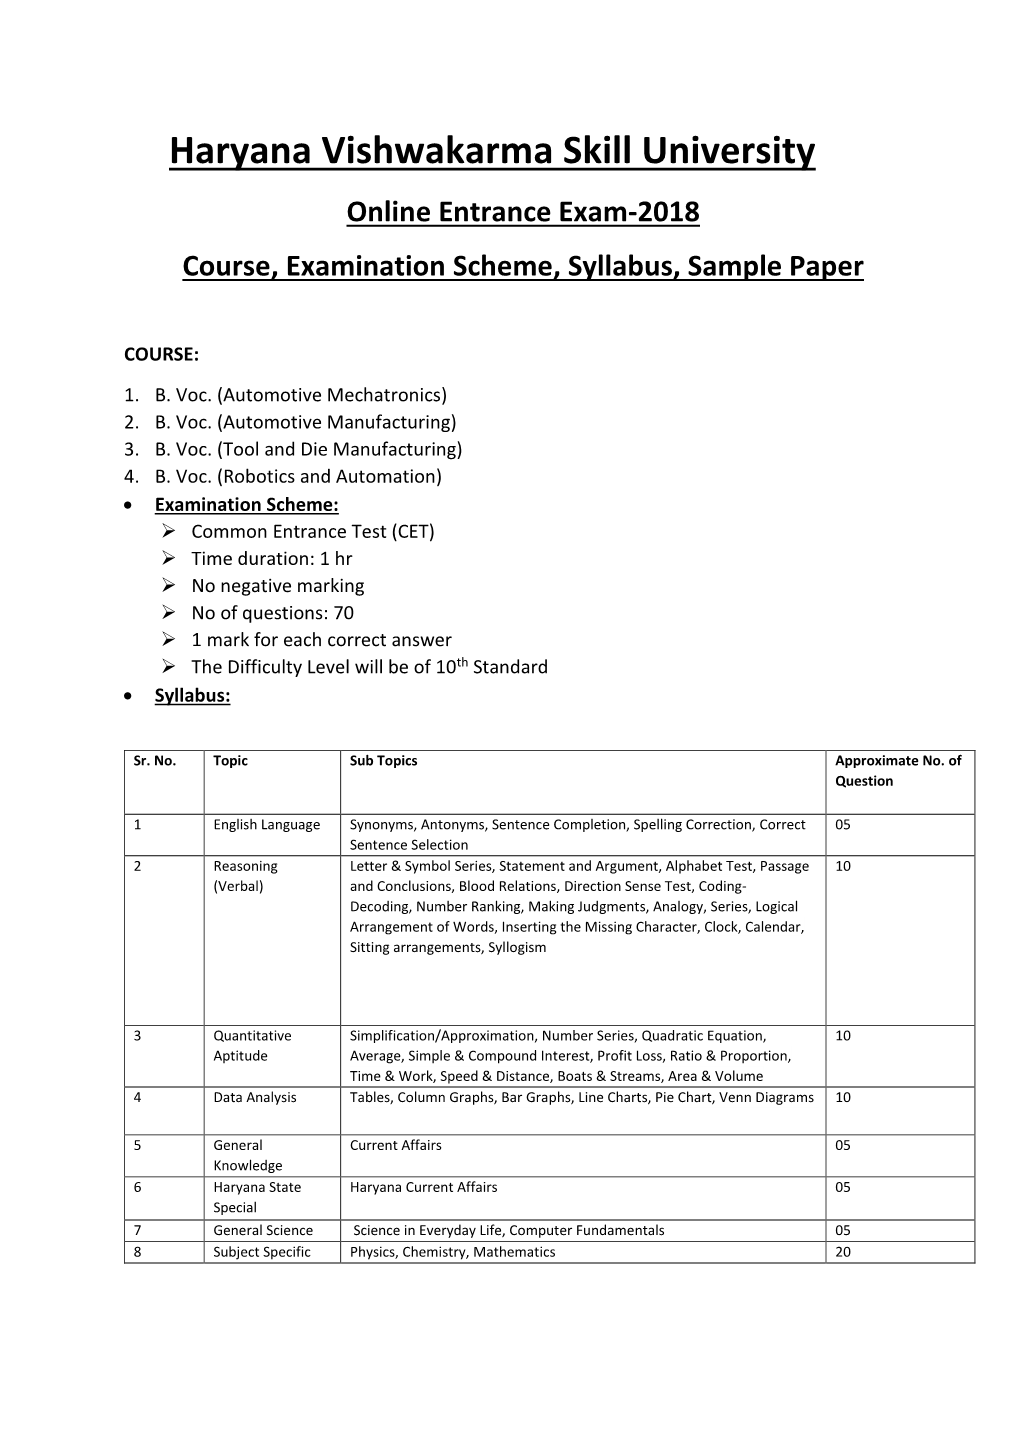 Sample Question Papers for Entrance